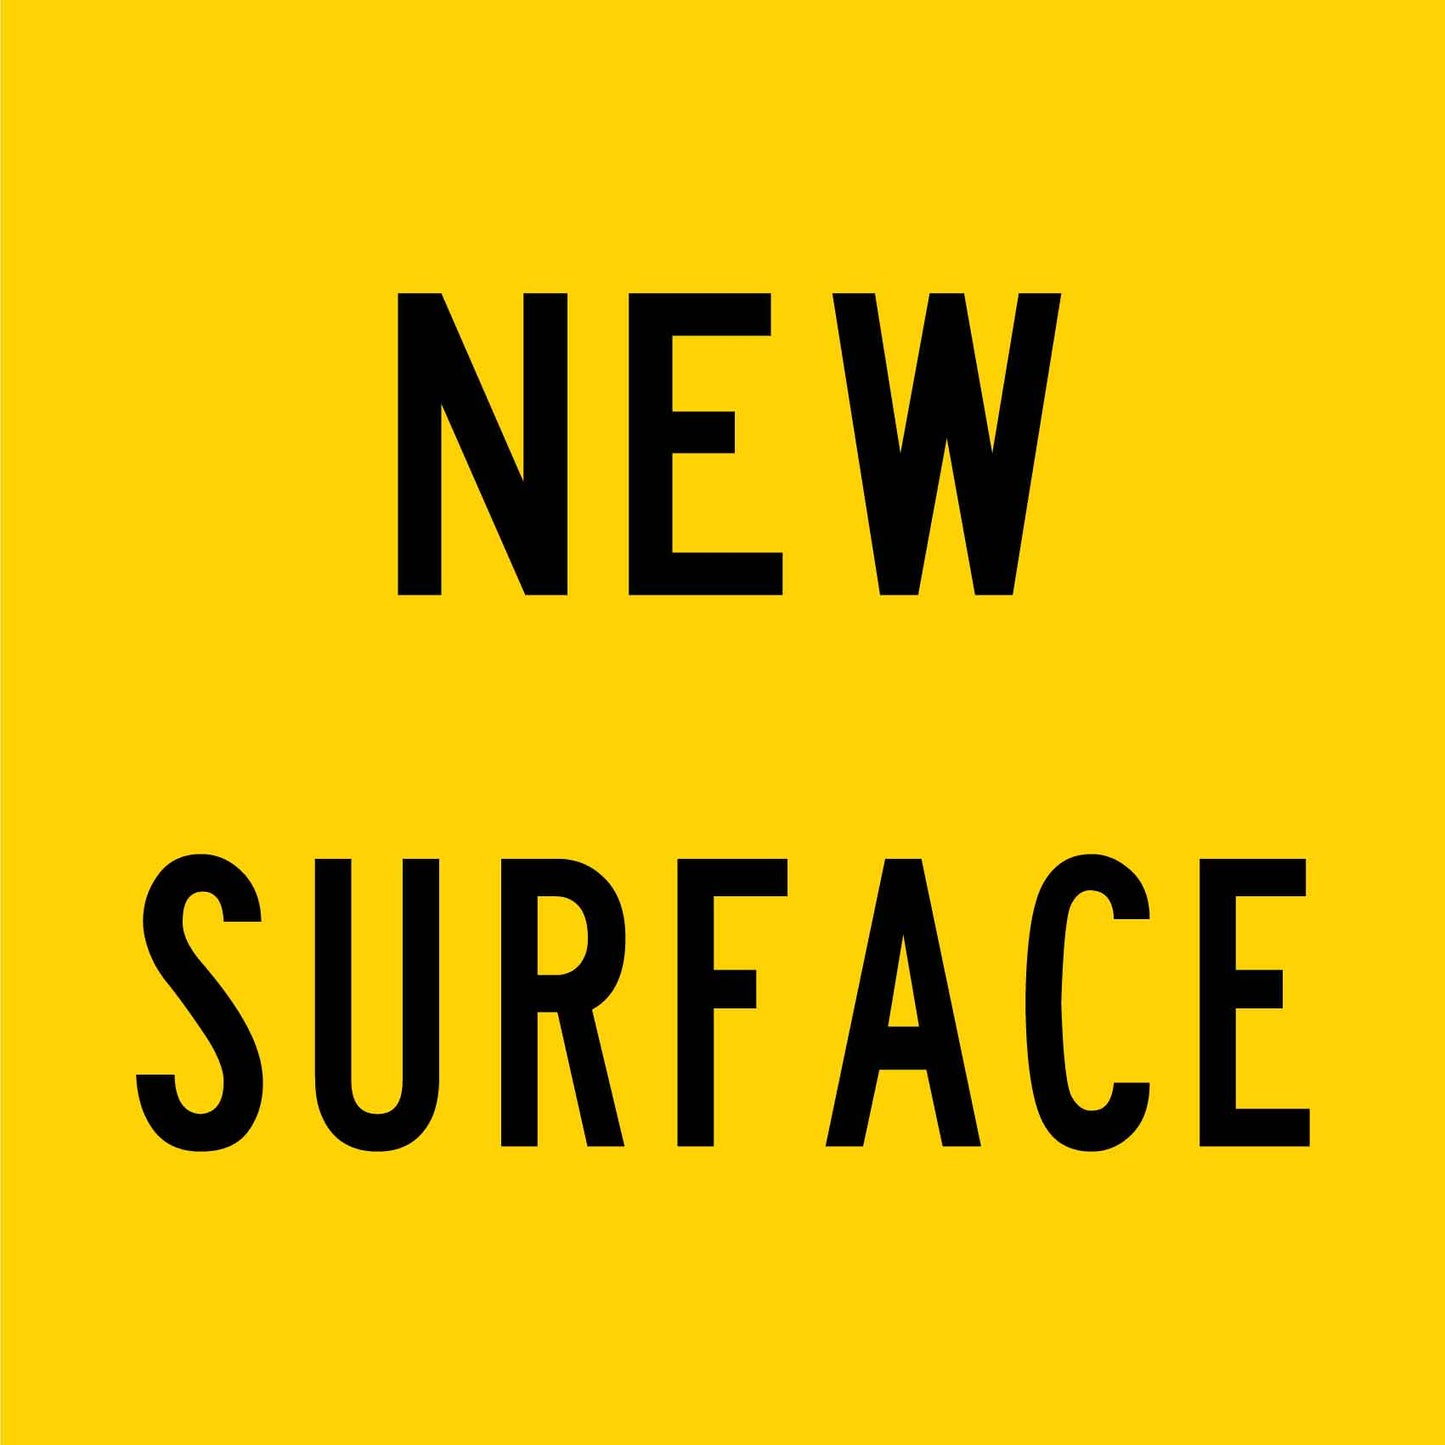 New Surface Multi Message Reflective Traffic Sign